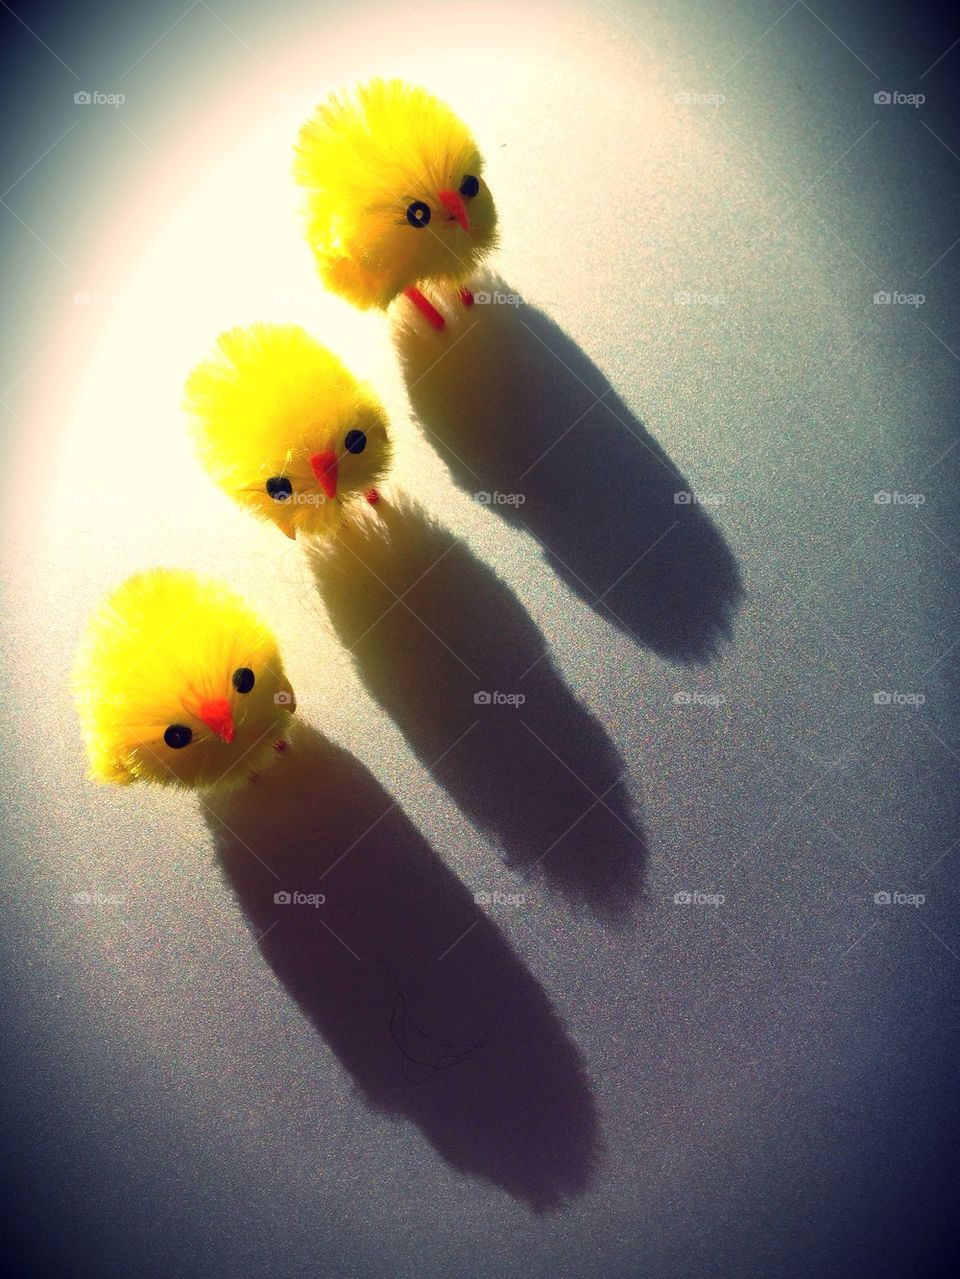 Cute toy baby chicks 